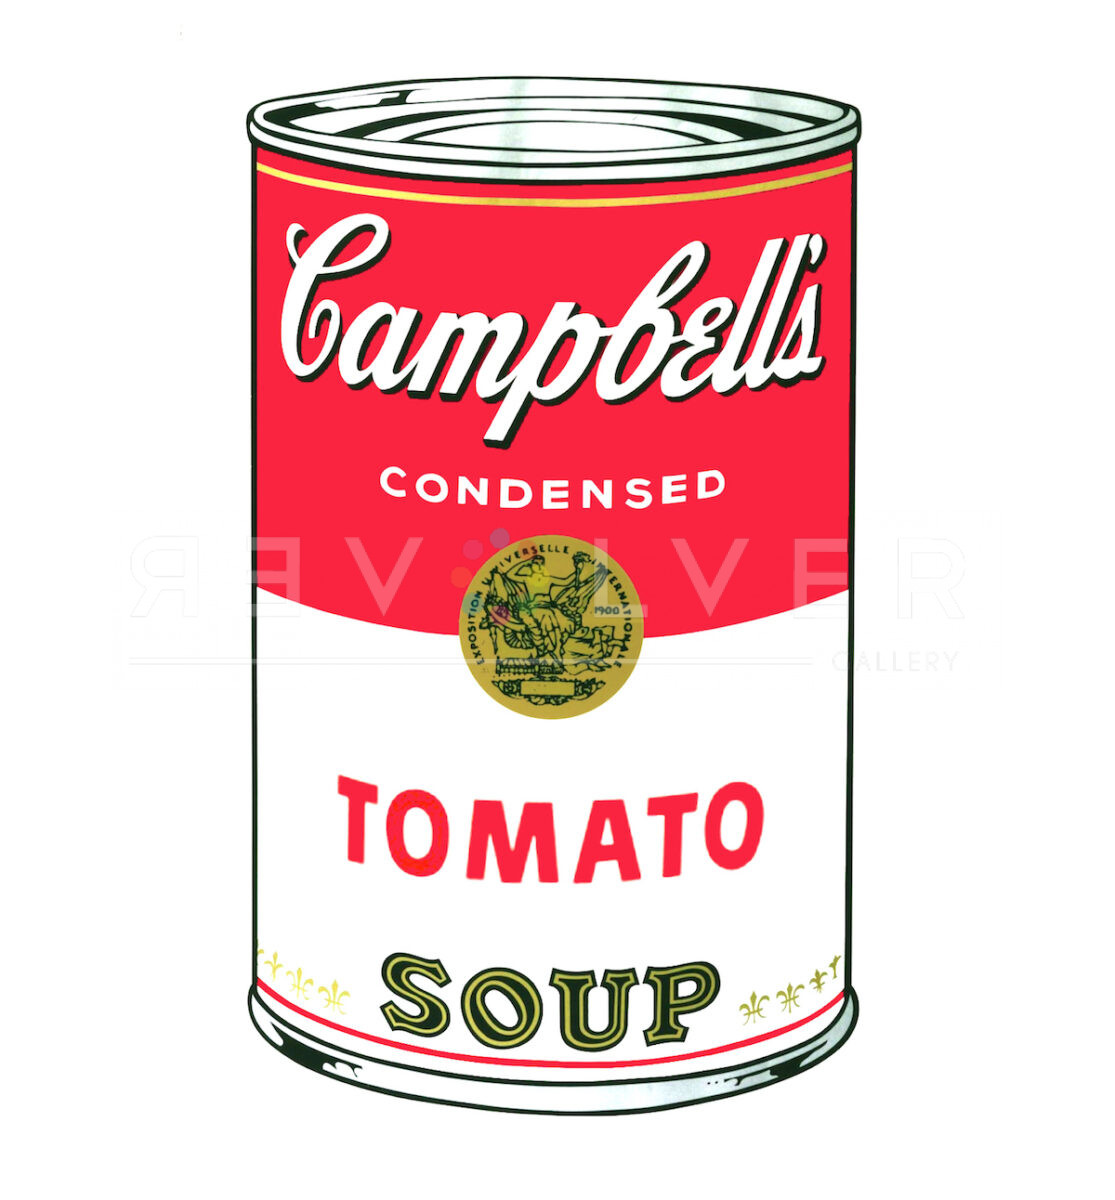 artist painting campbells soup cans